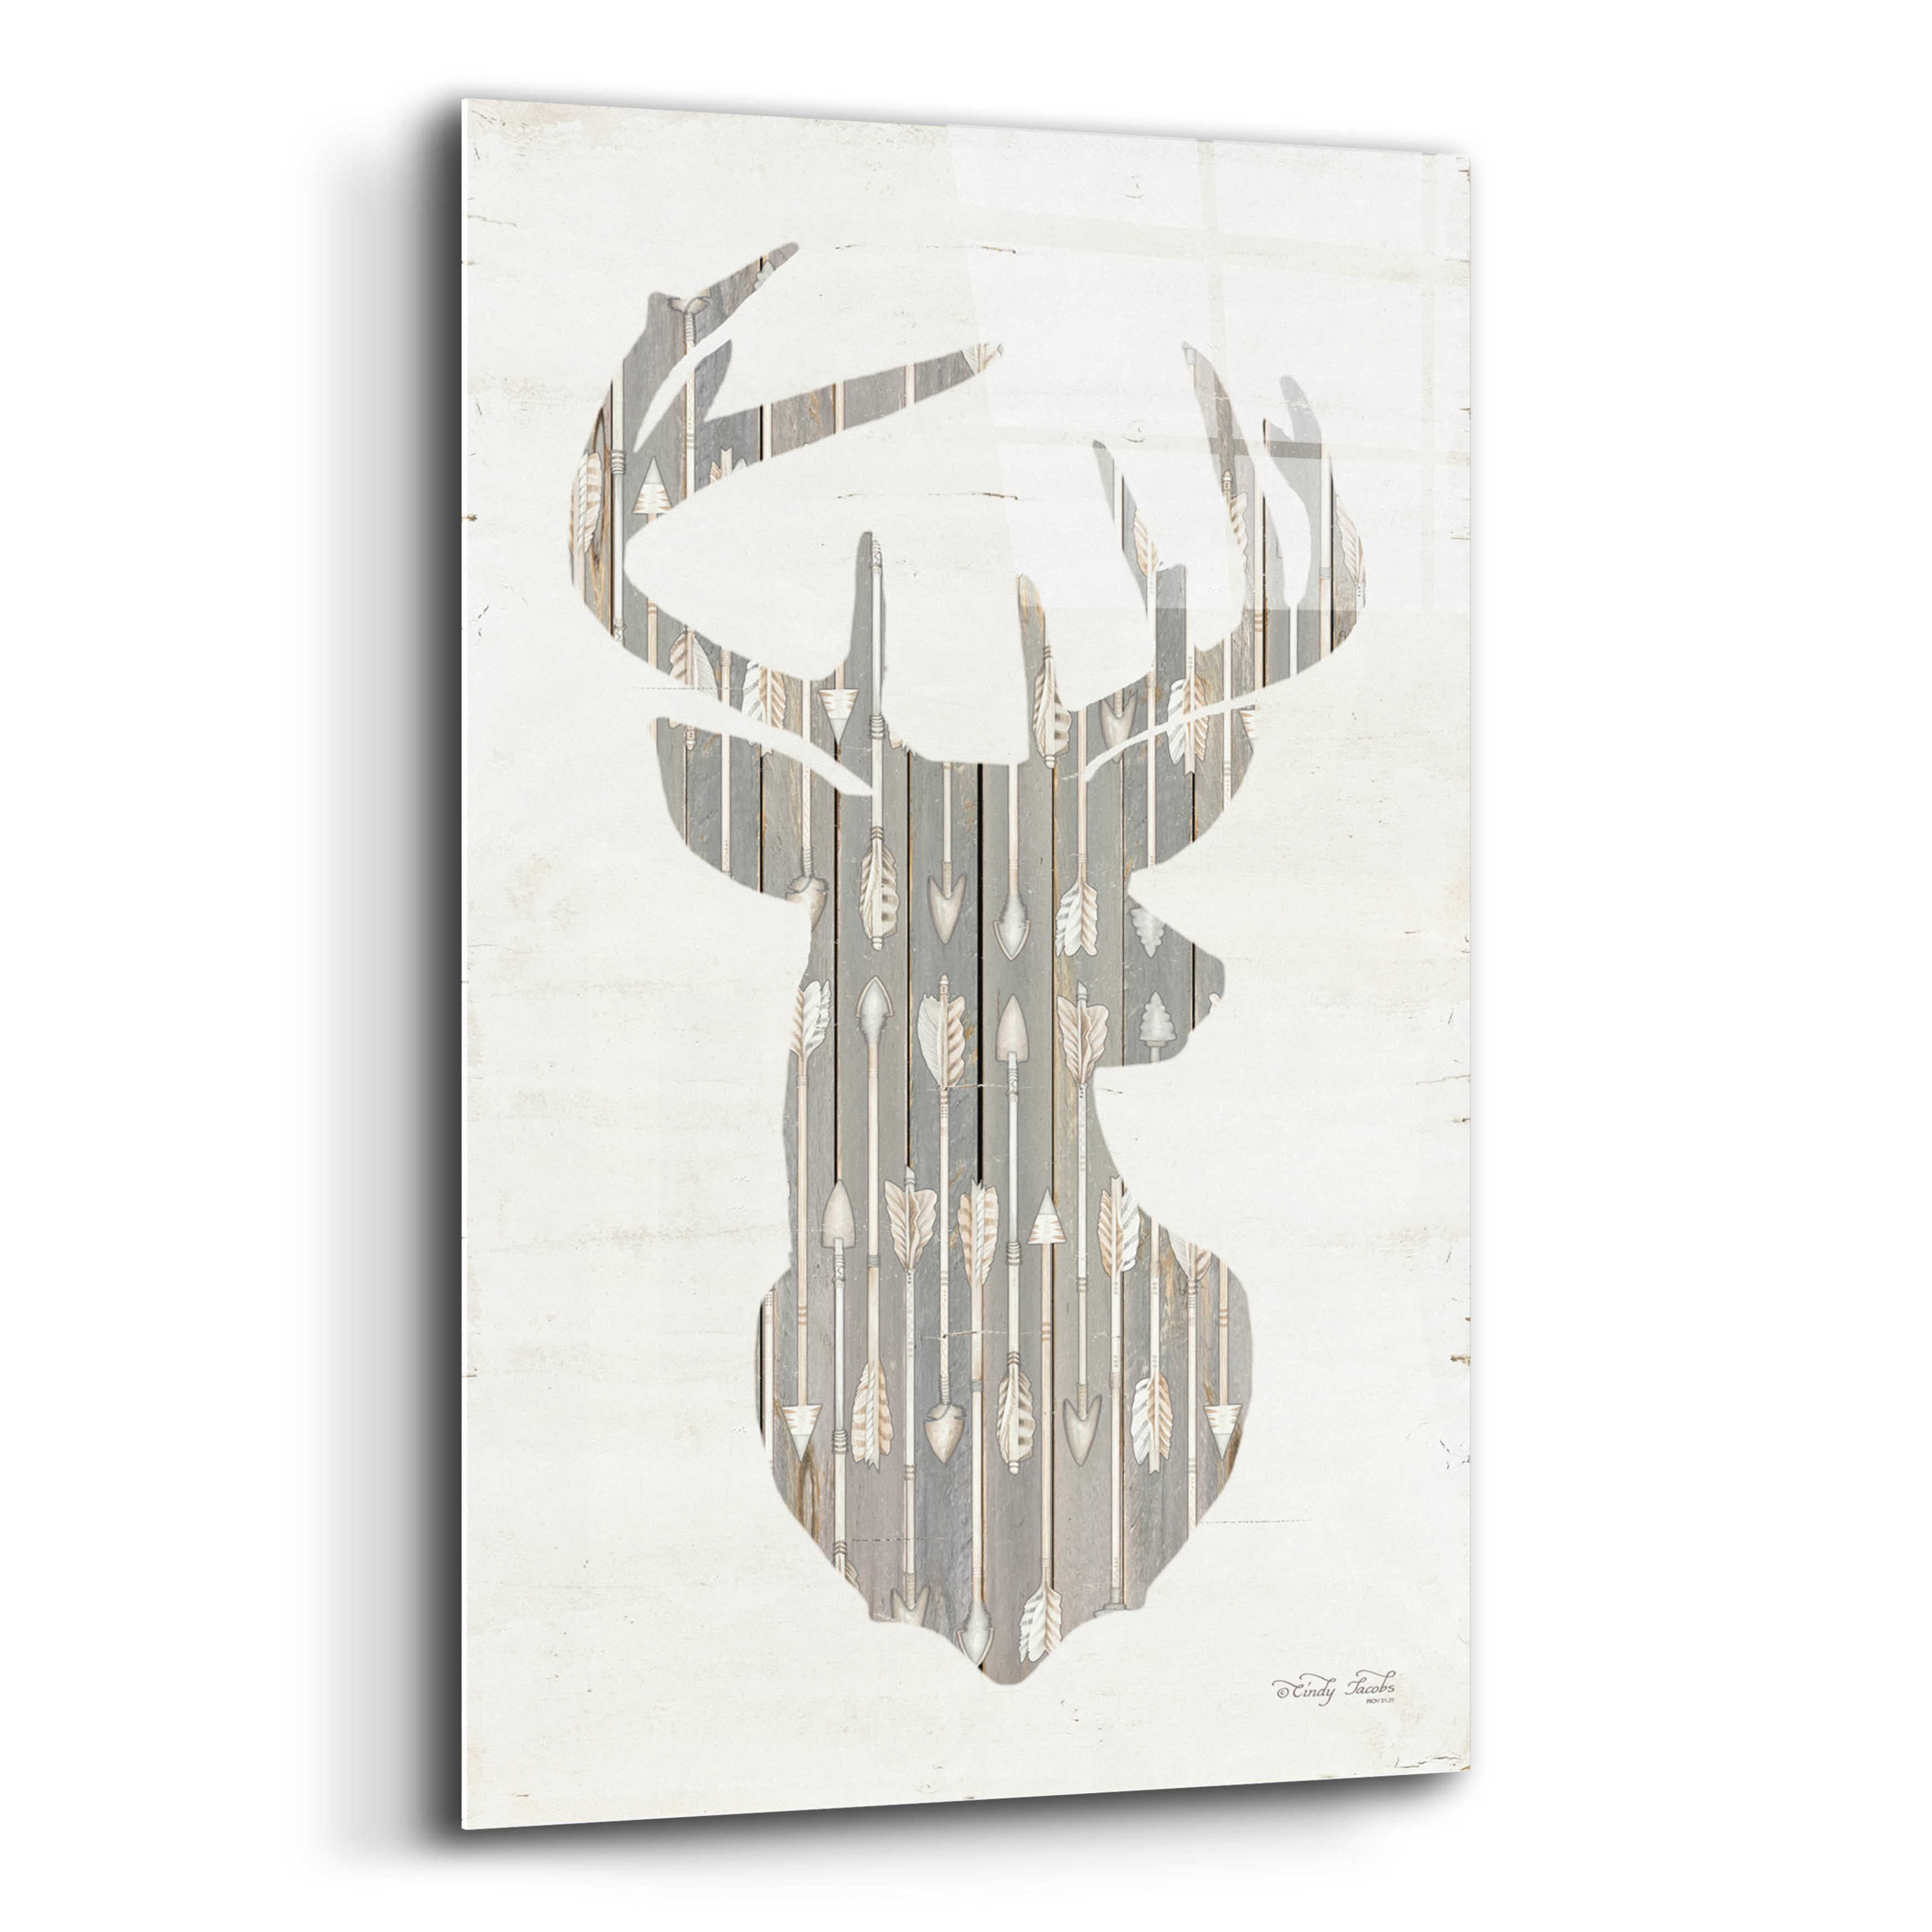 Millwood Pines Deer And Arrows Silhouette by Cindy Jacobs - Graphic Art ...